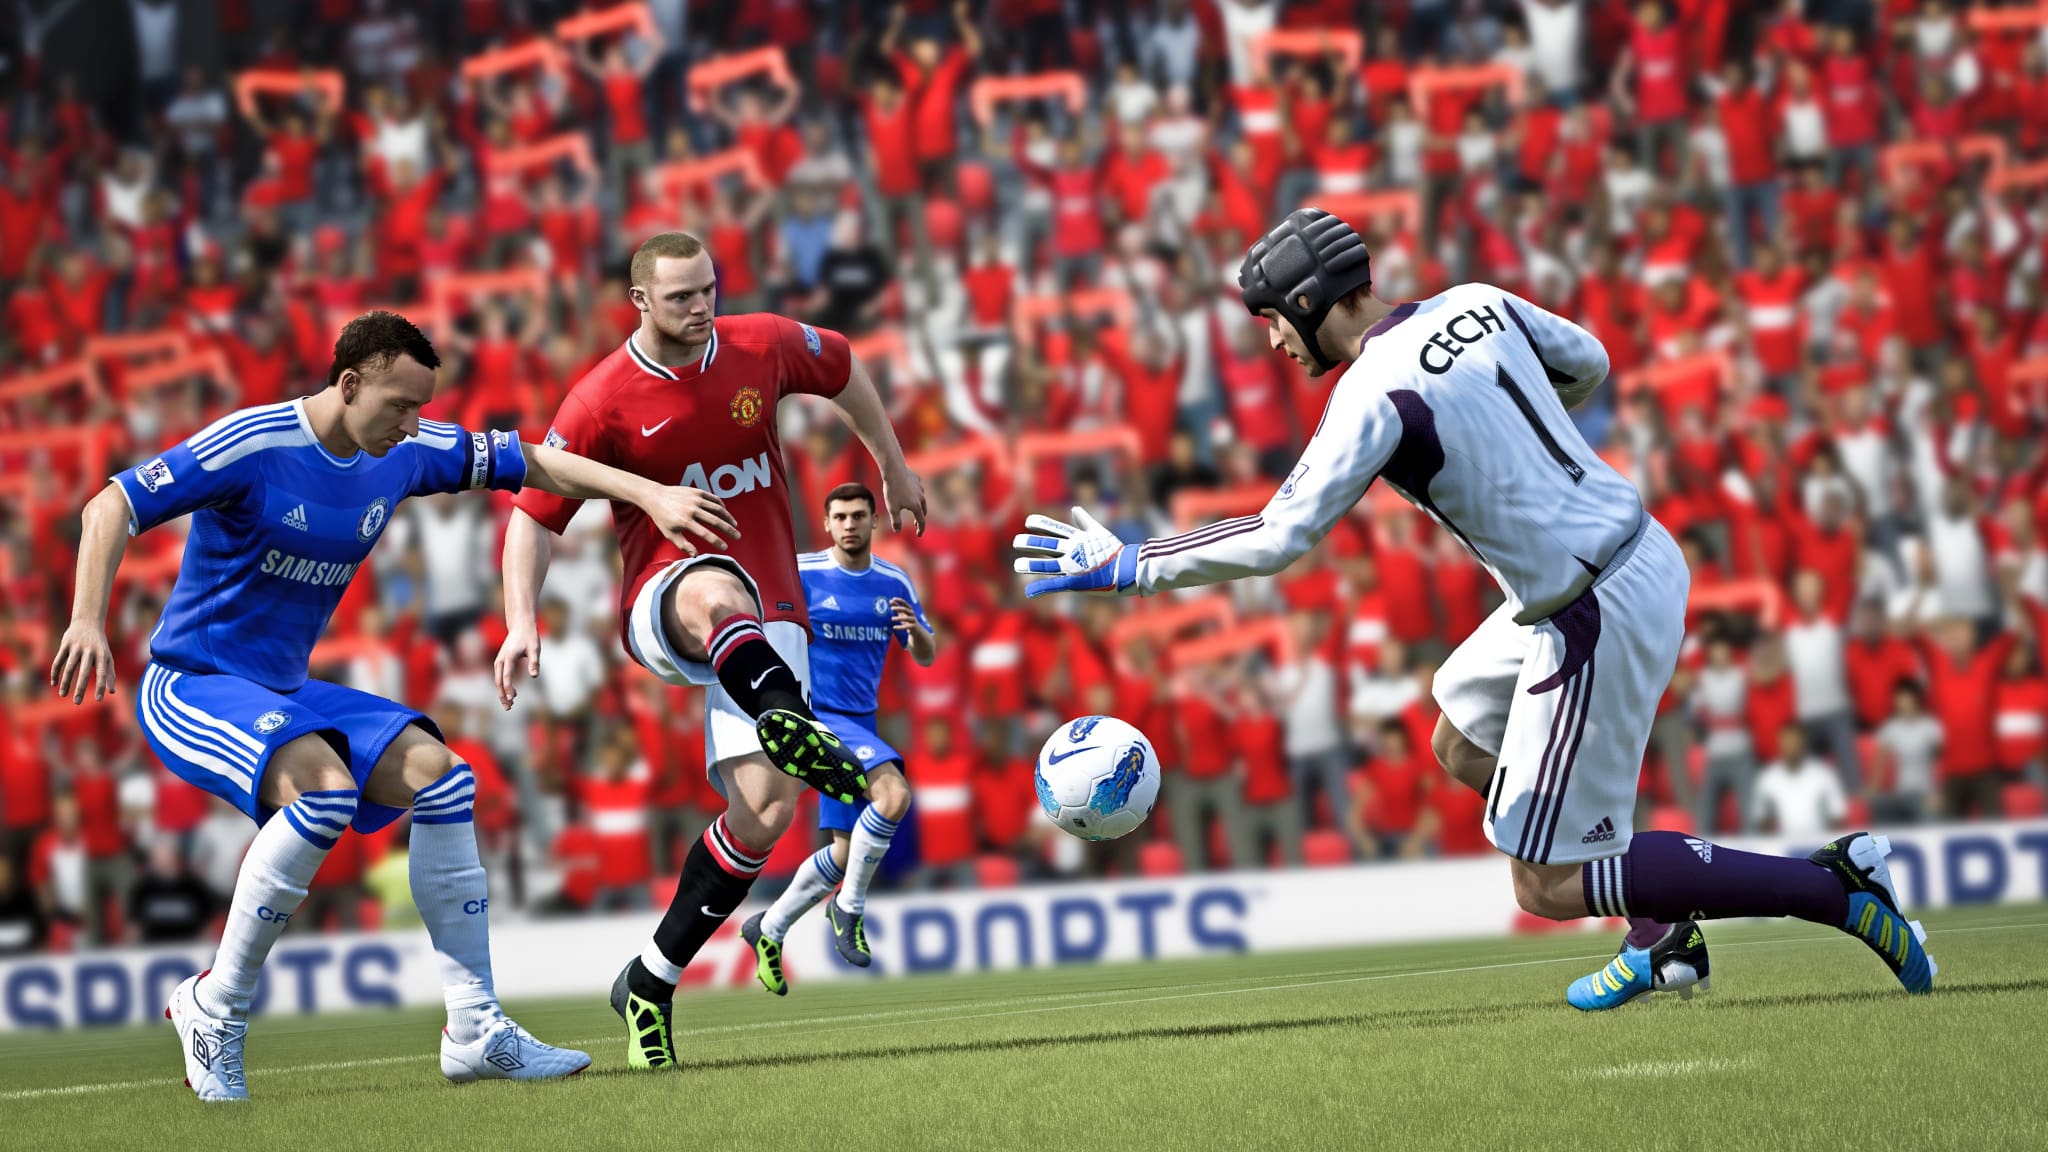 download fifa 12 for android free full